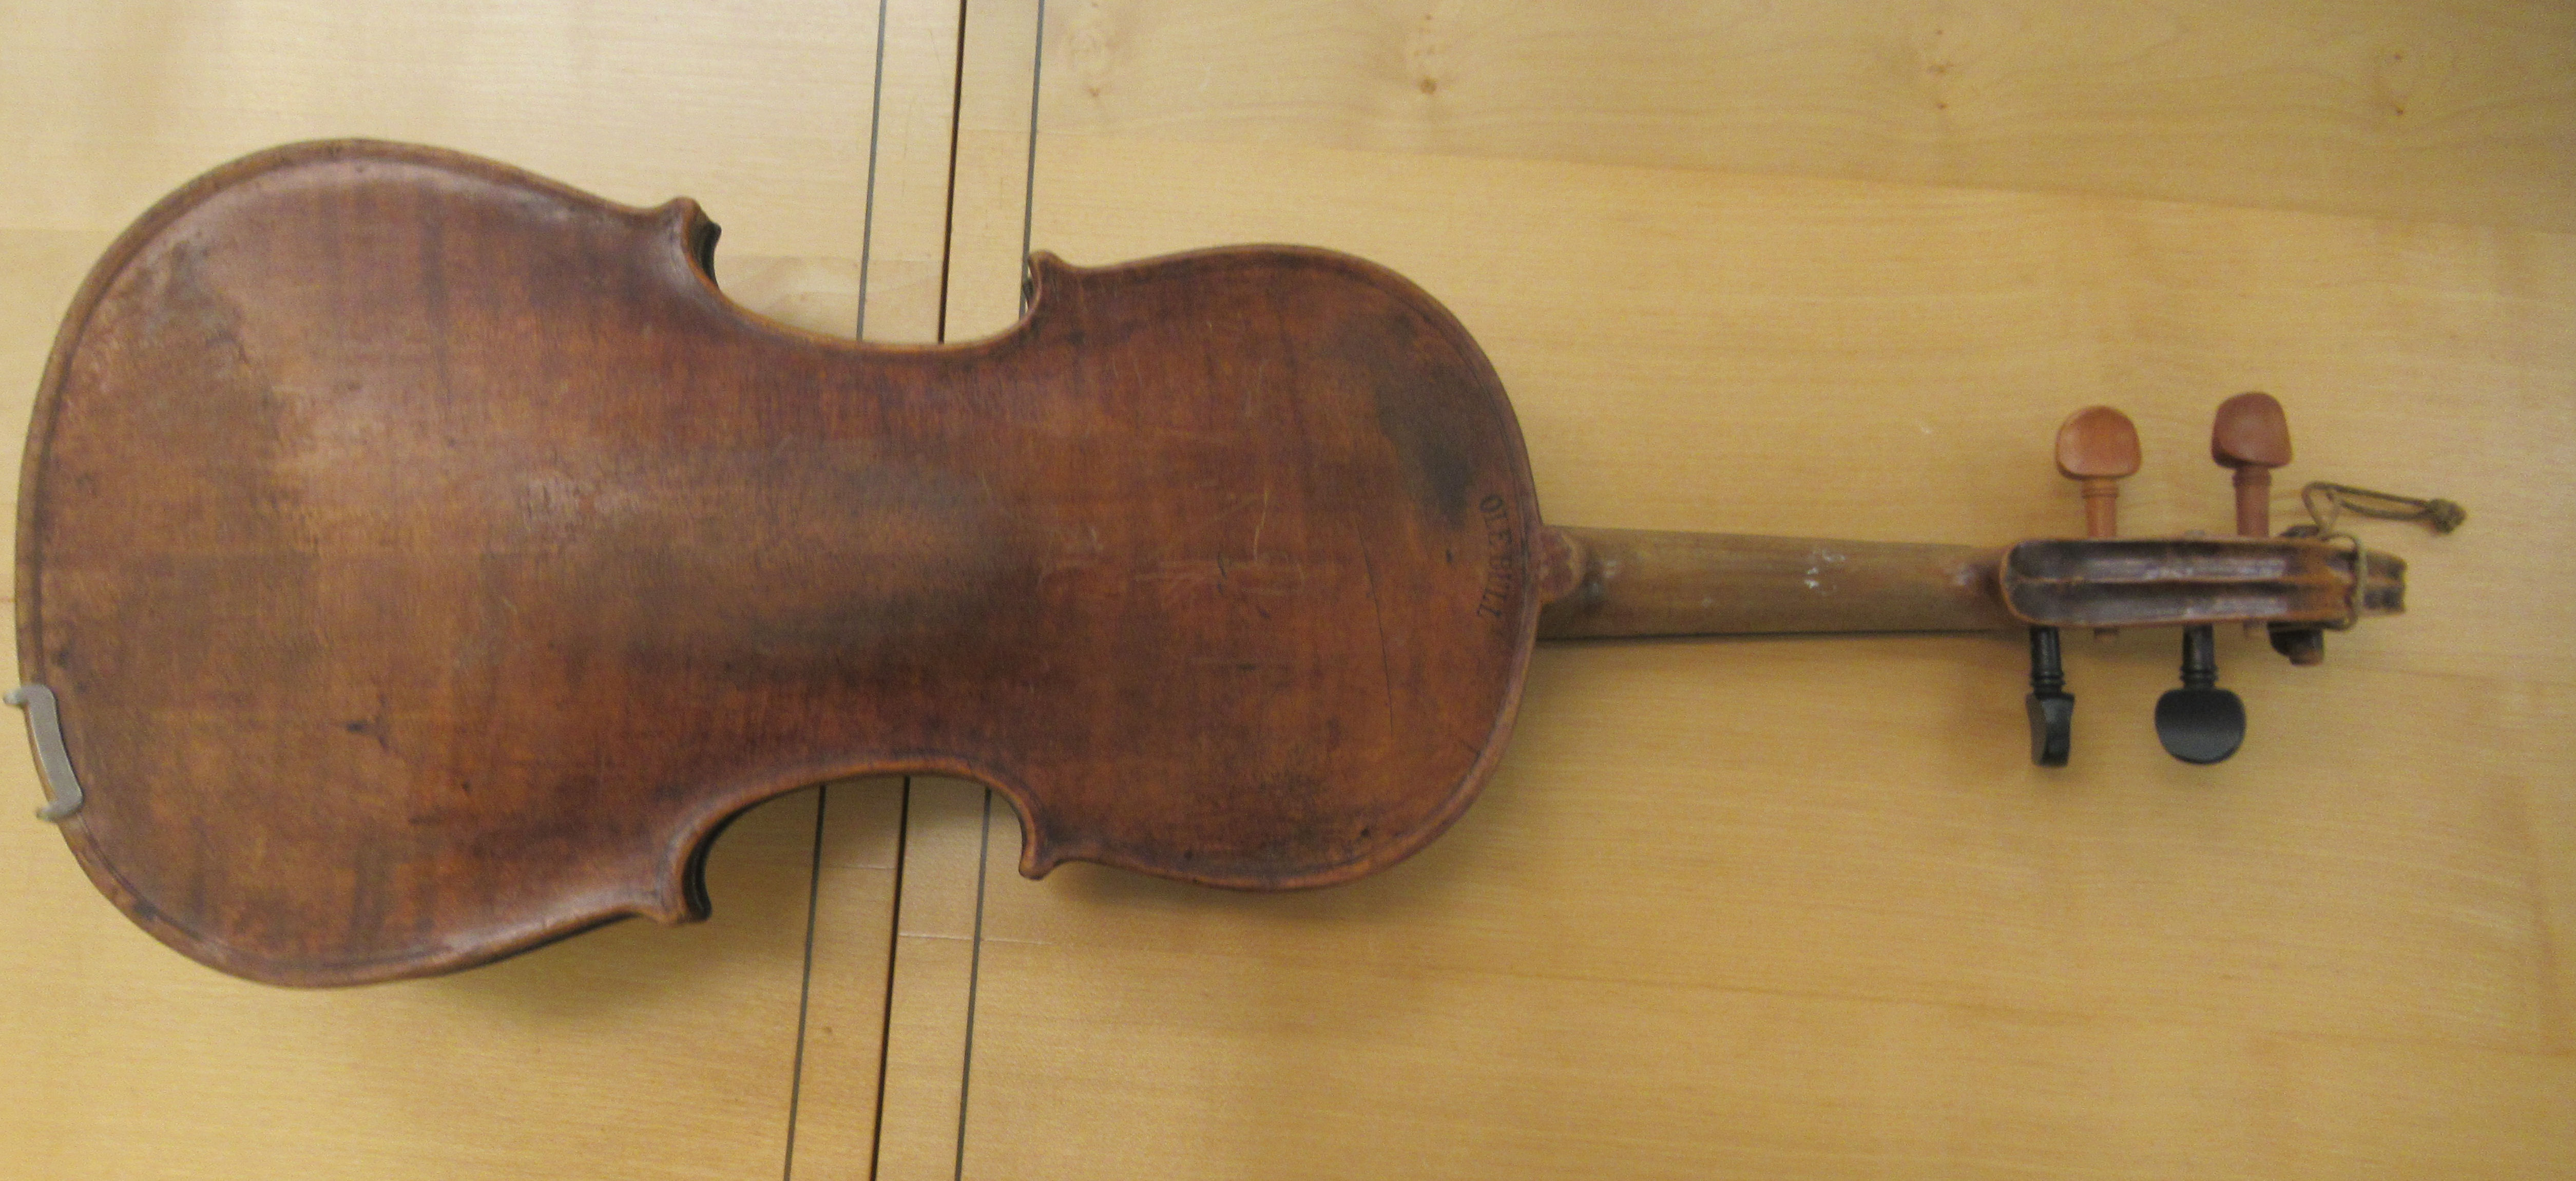 Three 19th/20thC violins, one with a one piece back  14"L; the others with two piece backs  13" - Image 8 of 16